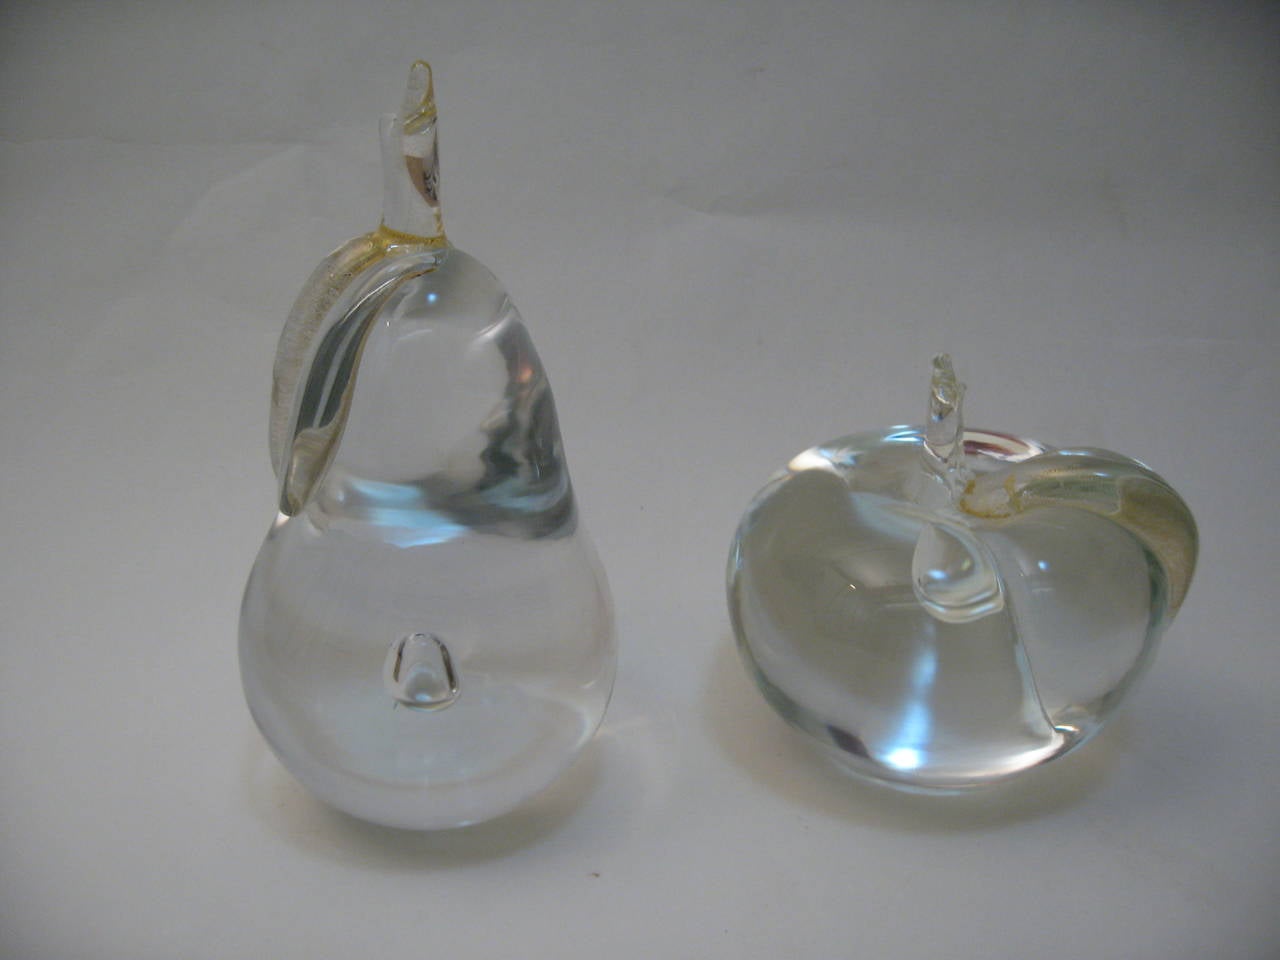 Beautiful set of Italian art glass bookends/paperweights with gold inclusions. The pear and apple are all handblown glass with polished pontils and controlled bubble in each. The gold inclusions are in the leaves of both pieces. Excellent, original